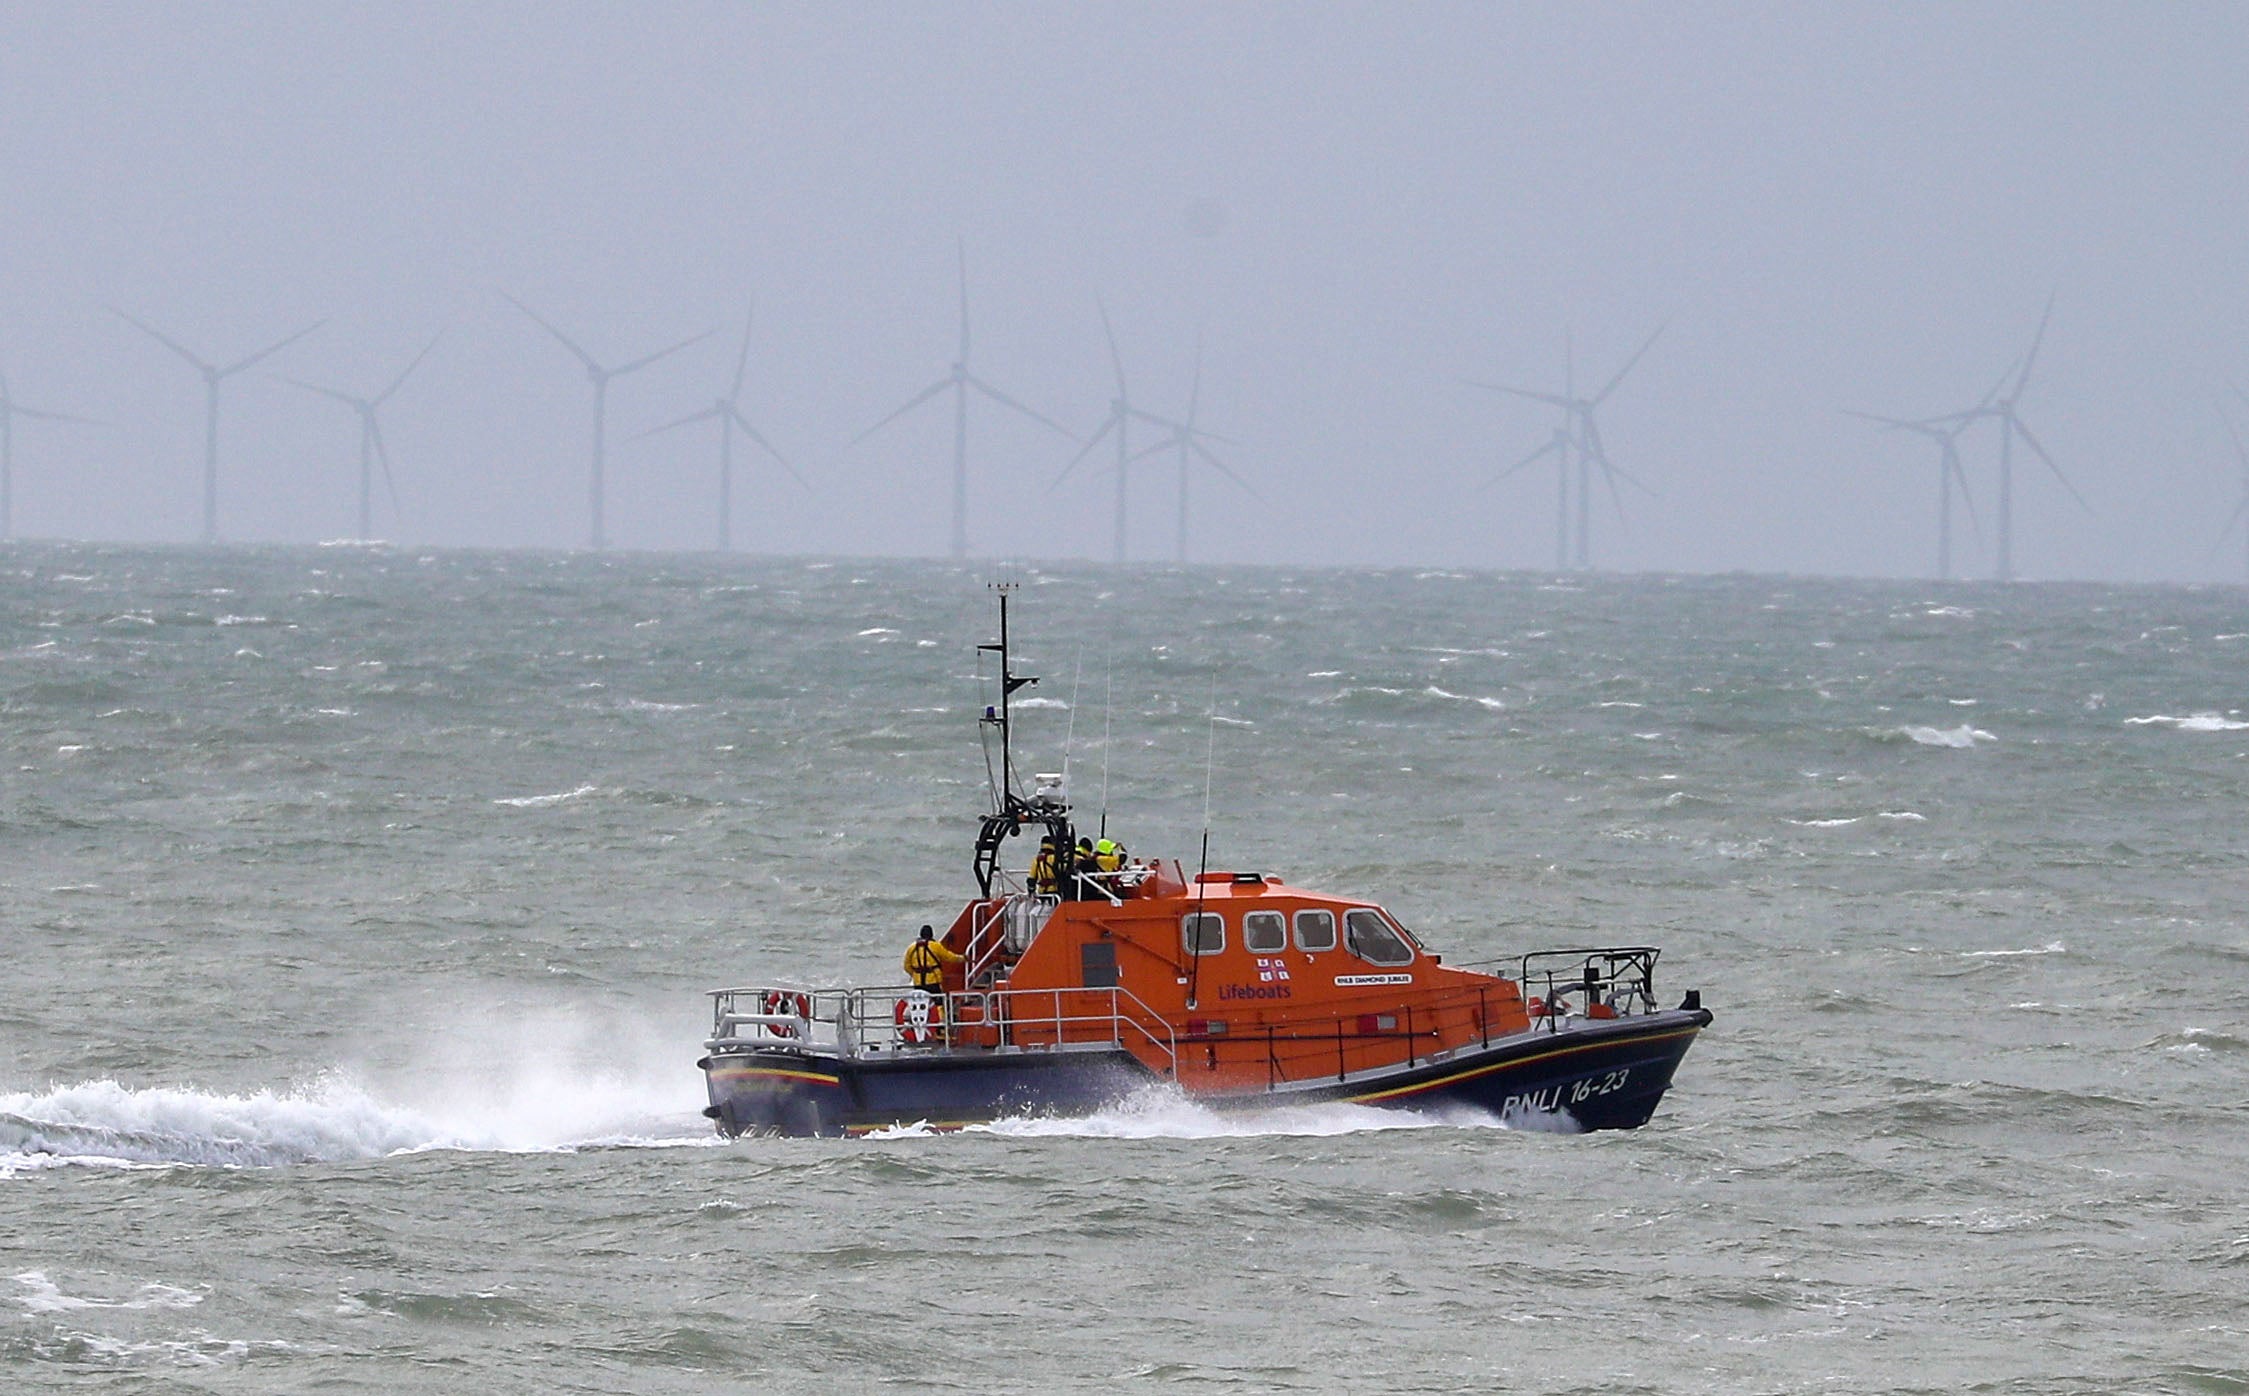 An RNLI lifeboat attends a call off UK shores in 2020